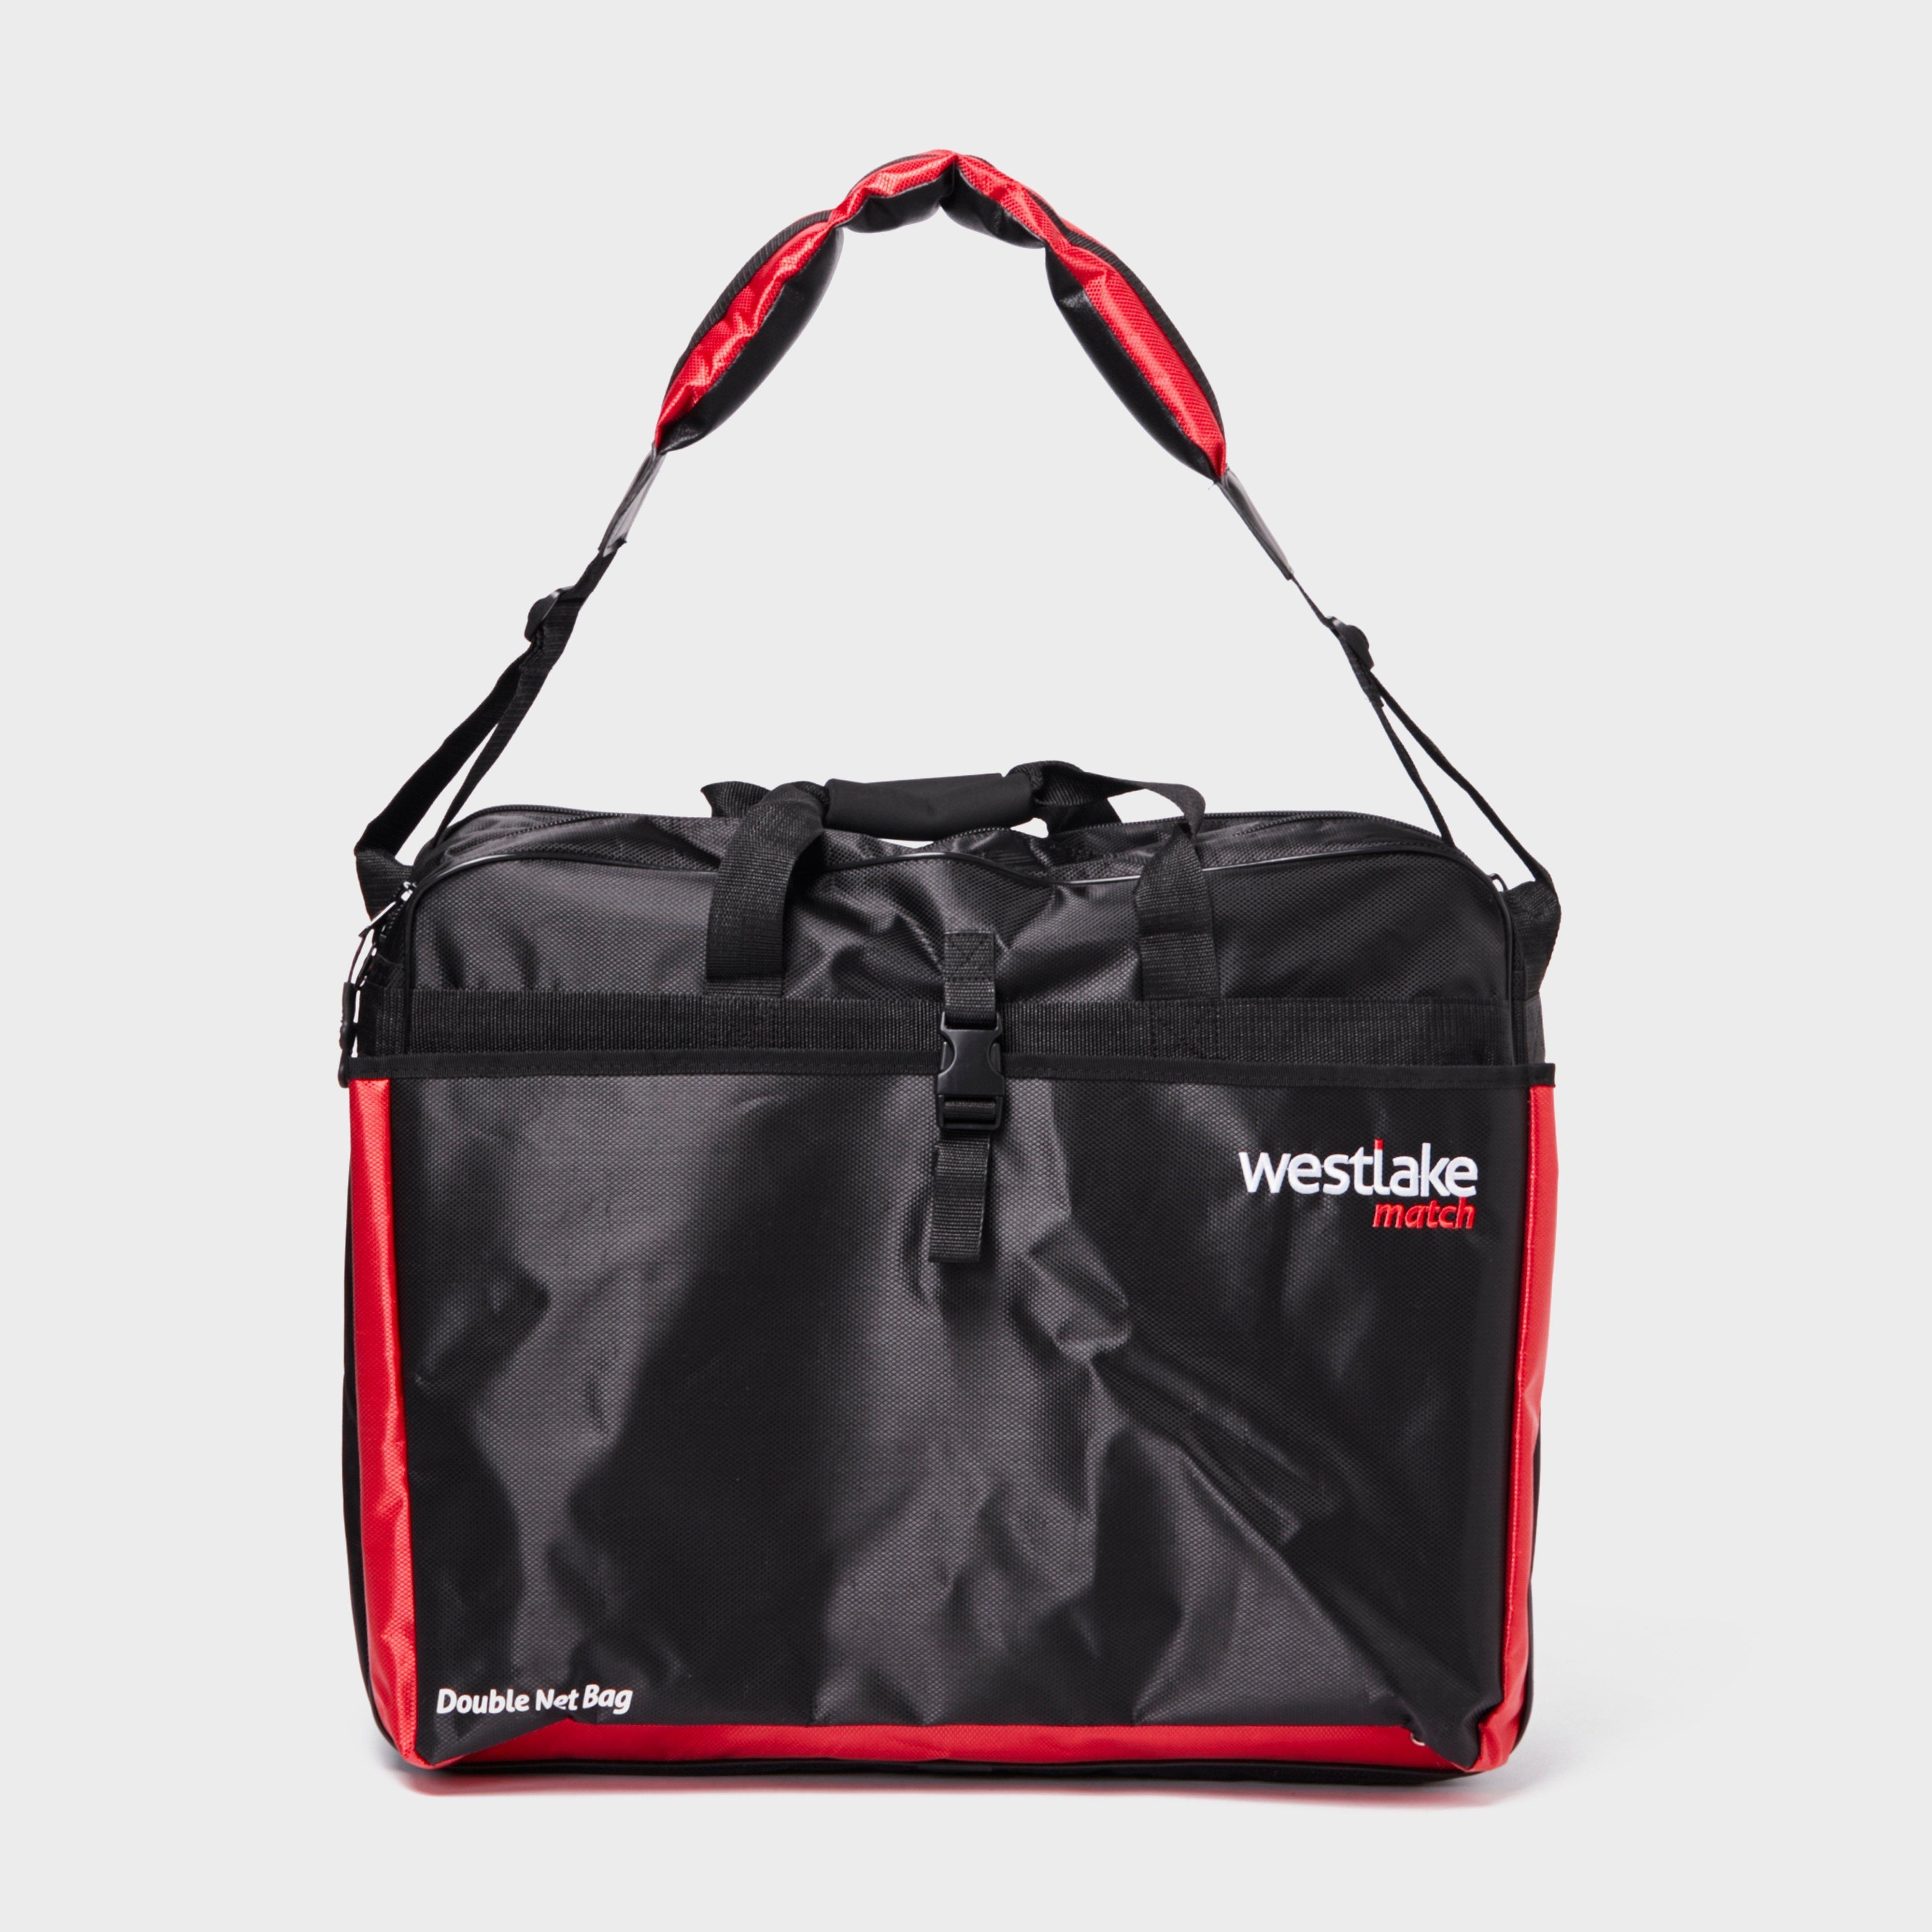 New WESTLAKE Match Holdall With Side Reel